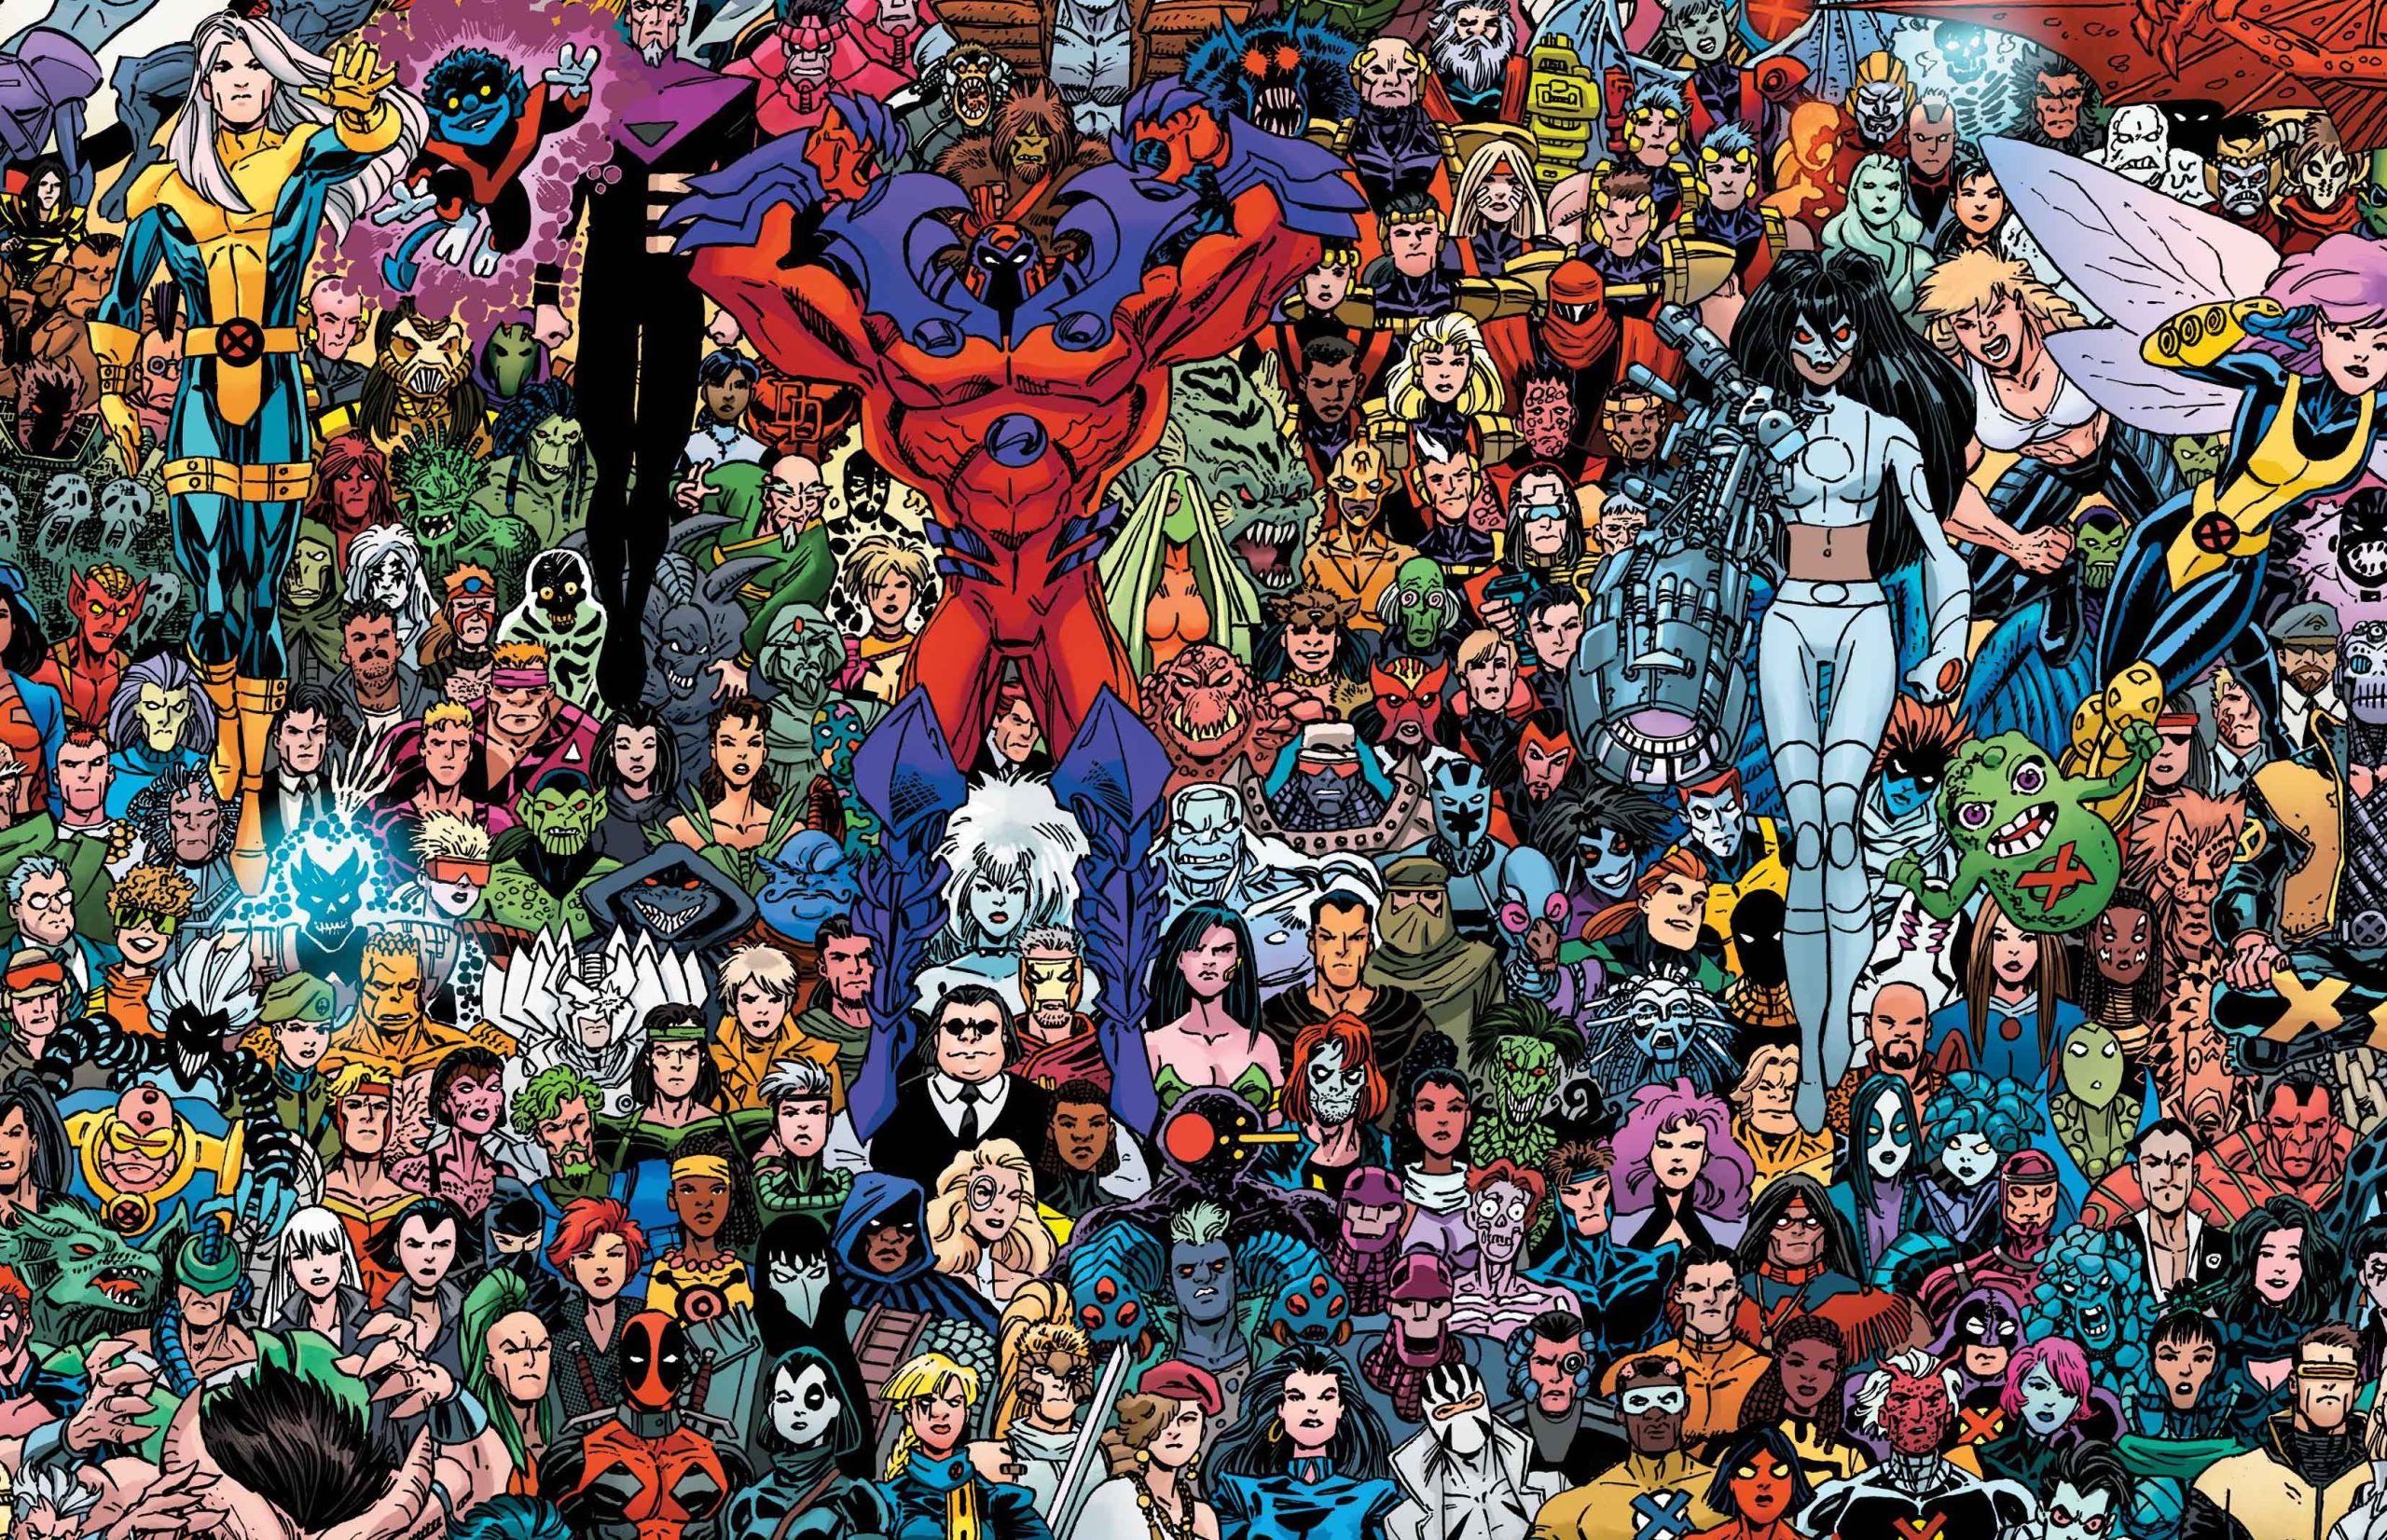 Check out every 'Uncanny X-Men' #1 cover all in one place